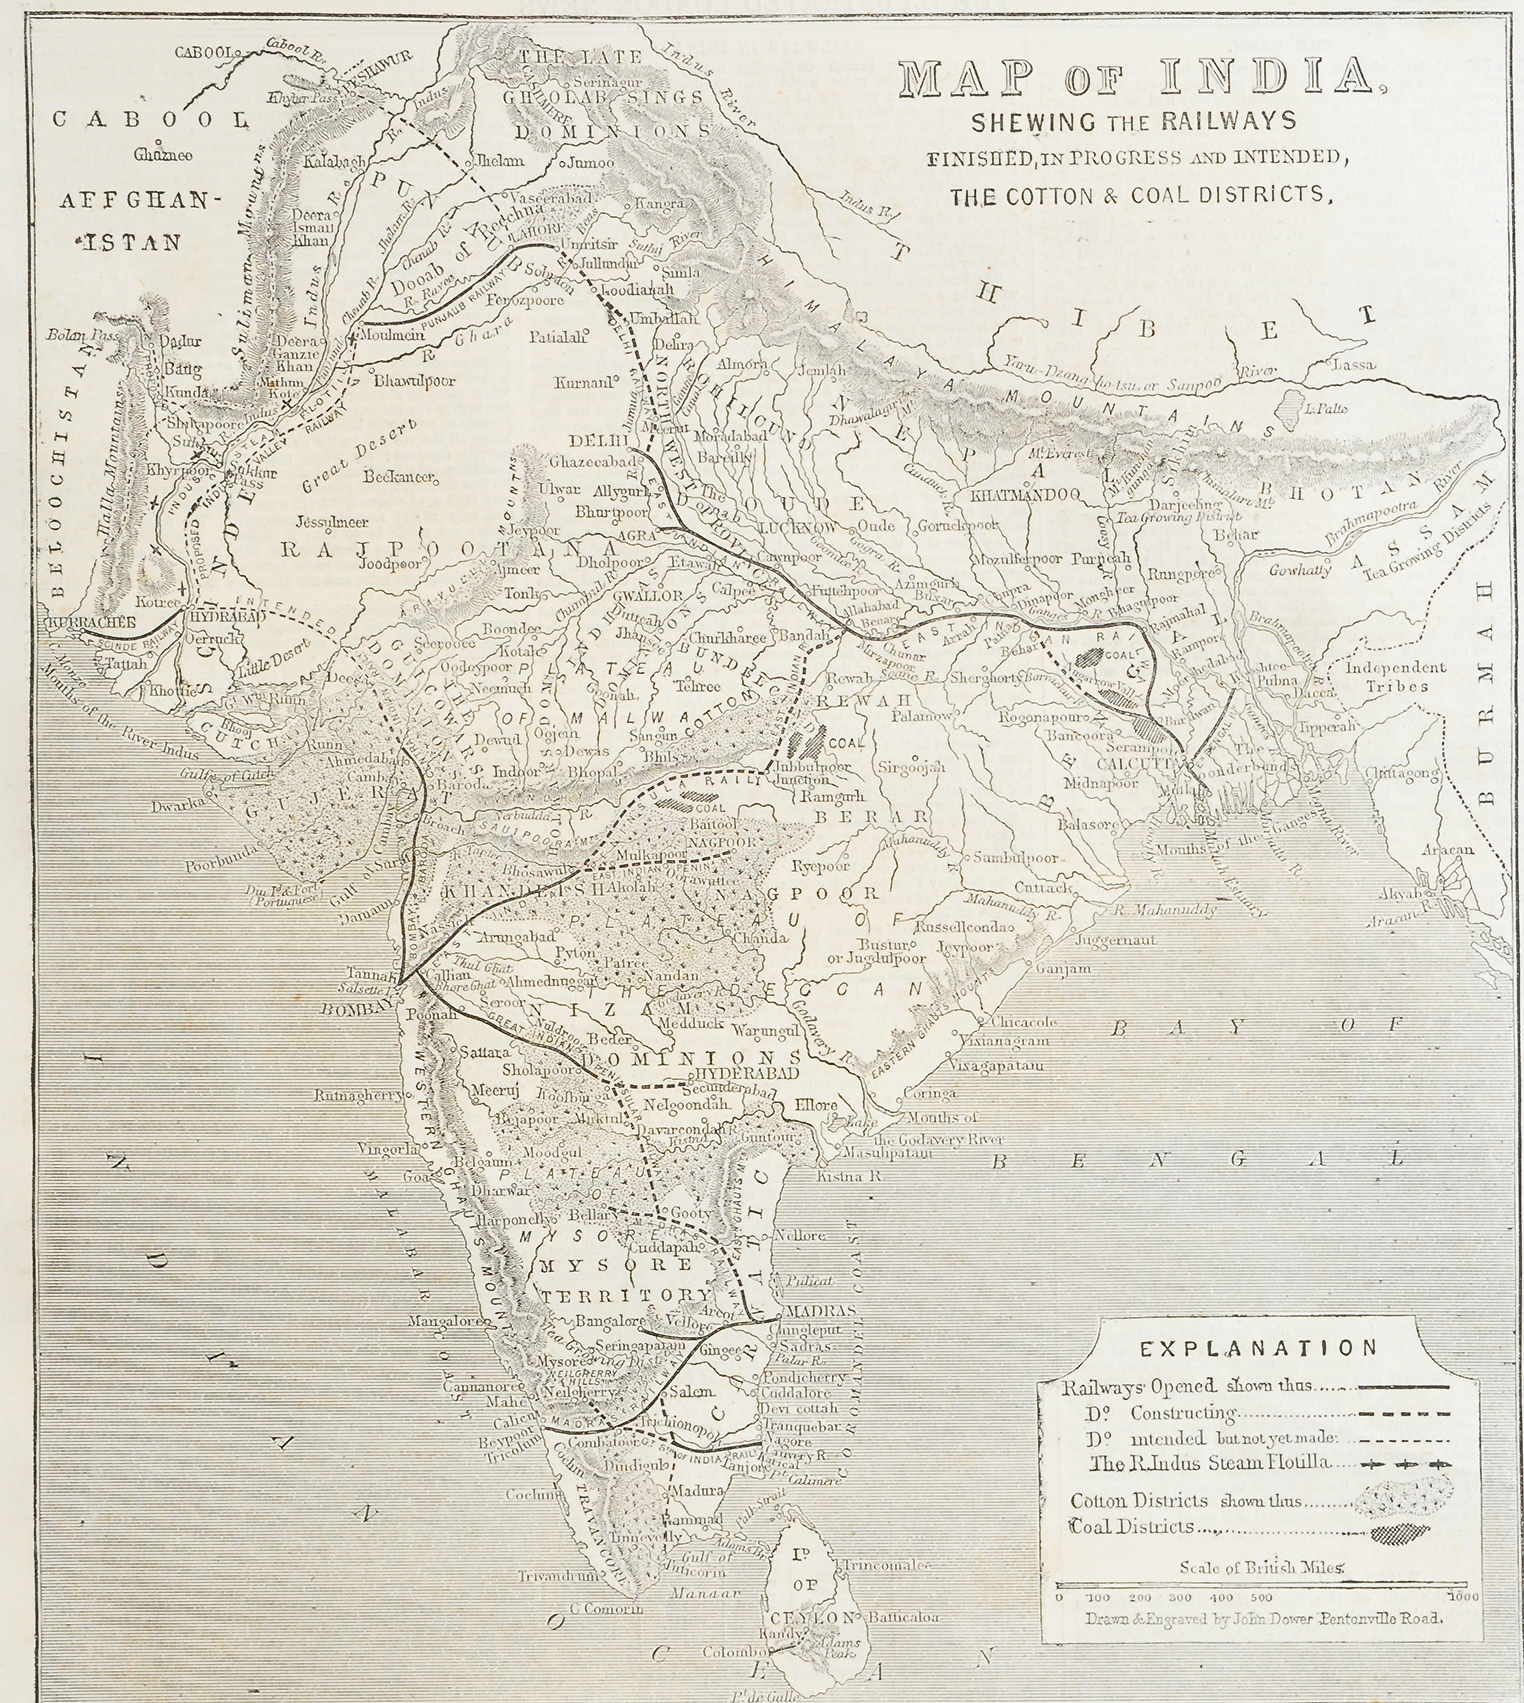 Showing Railway Map of British India In 1865